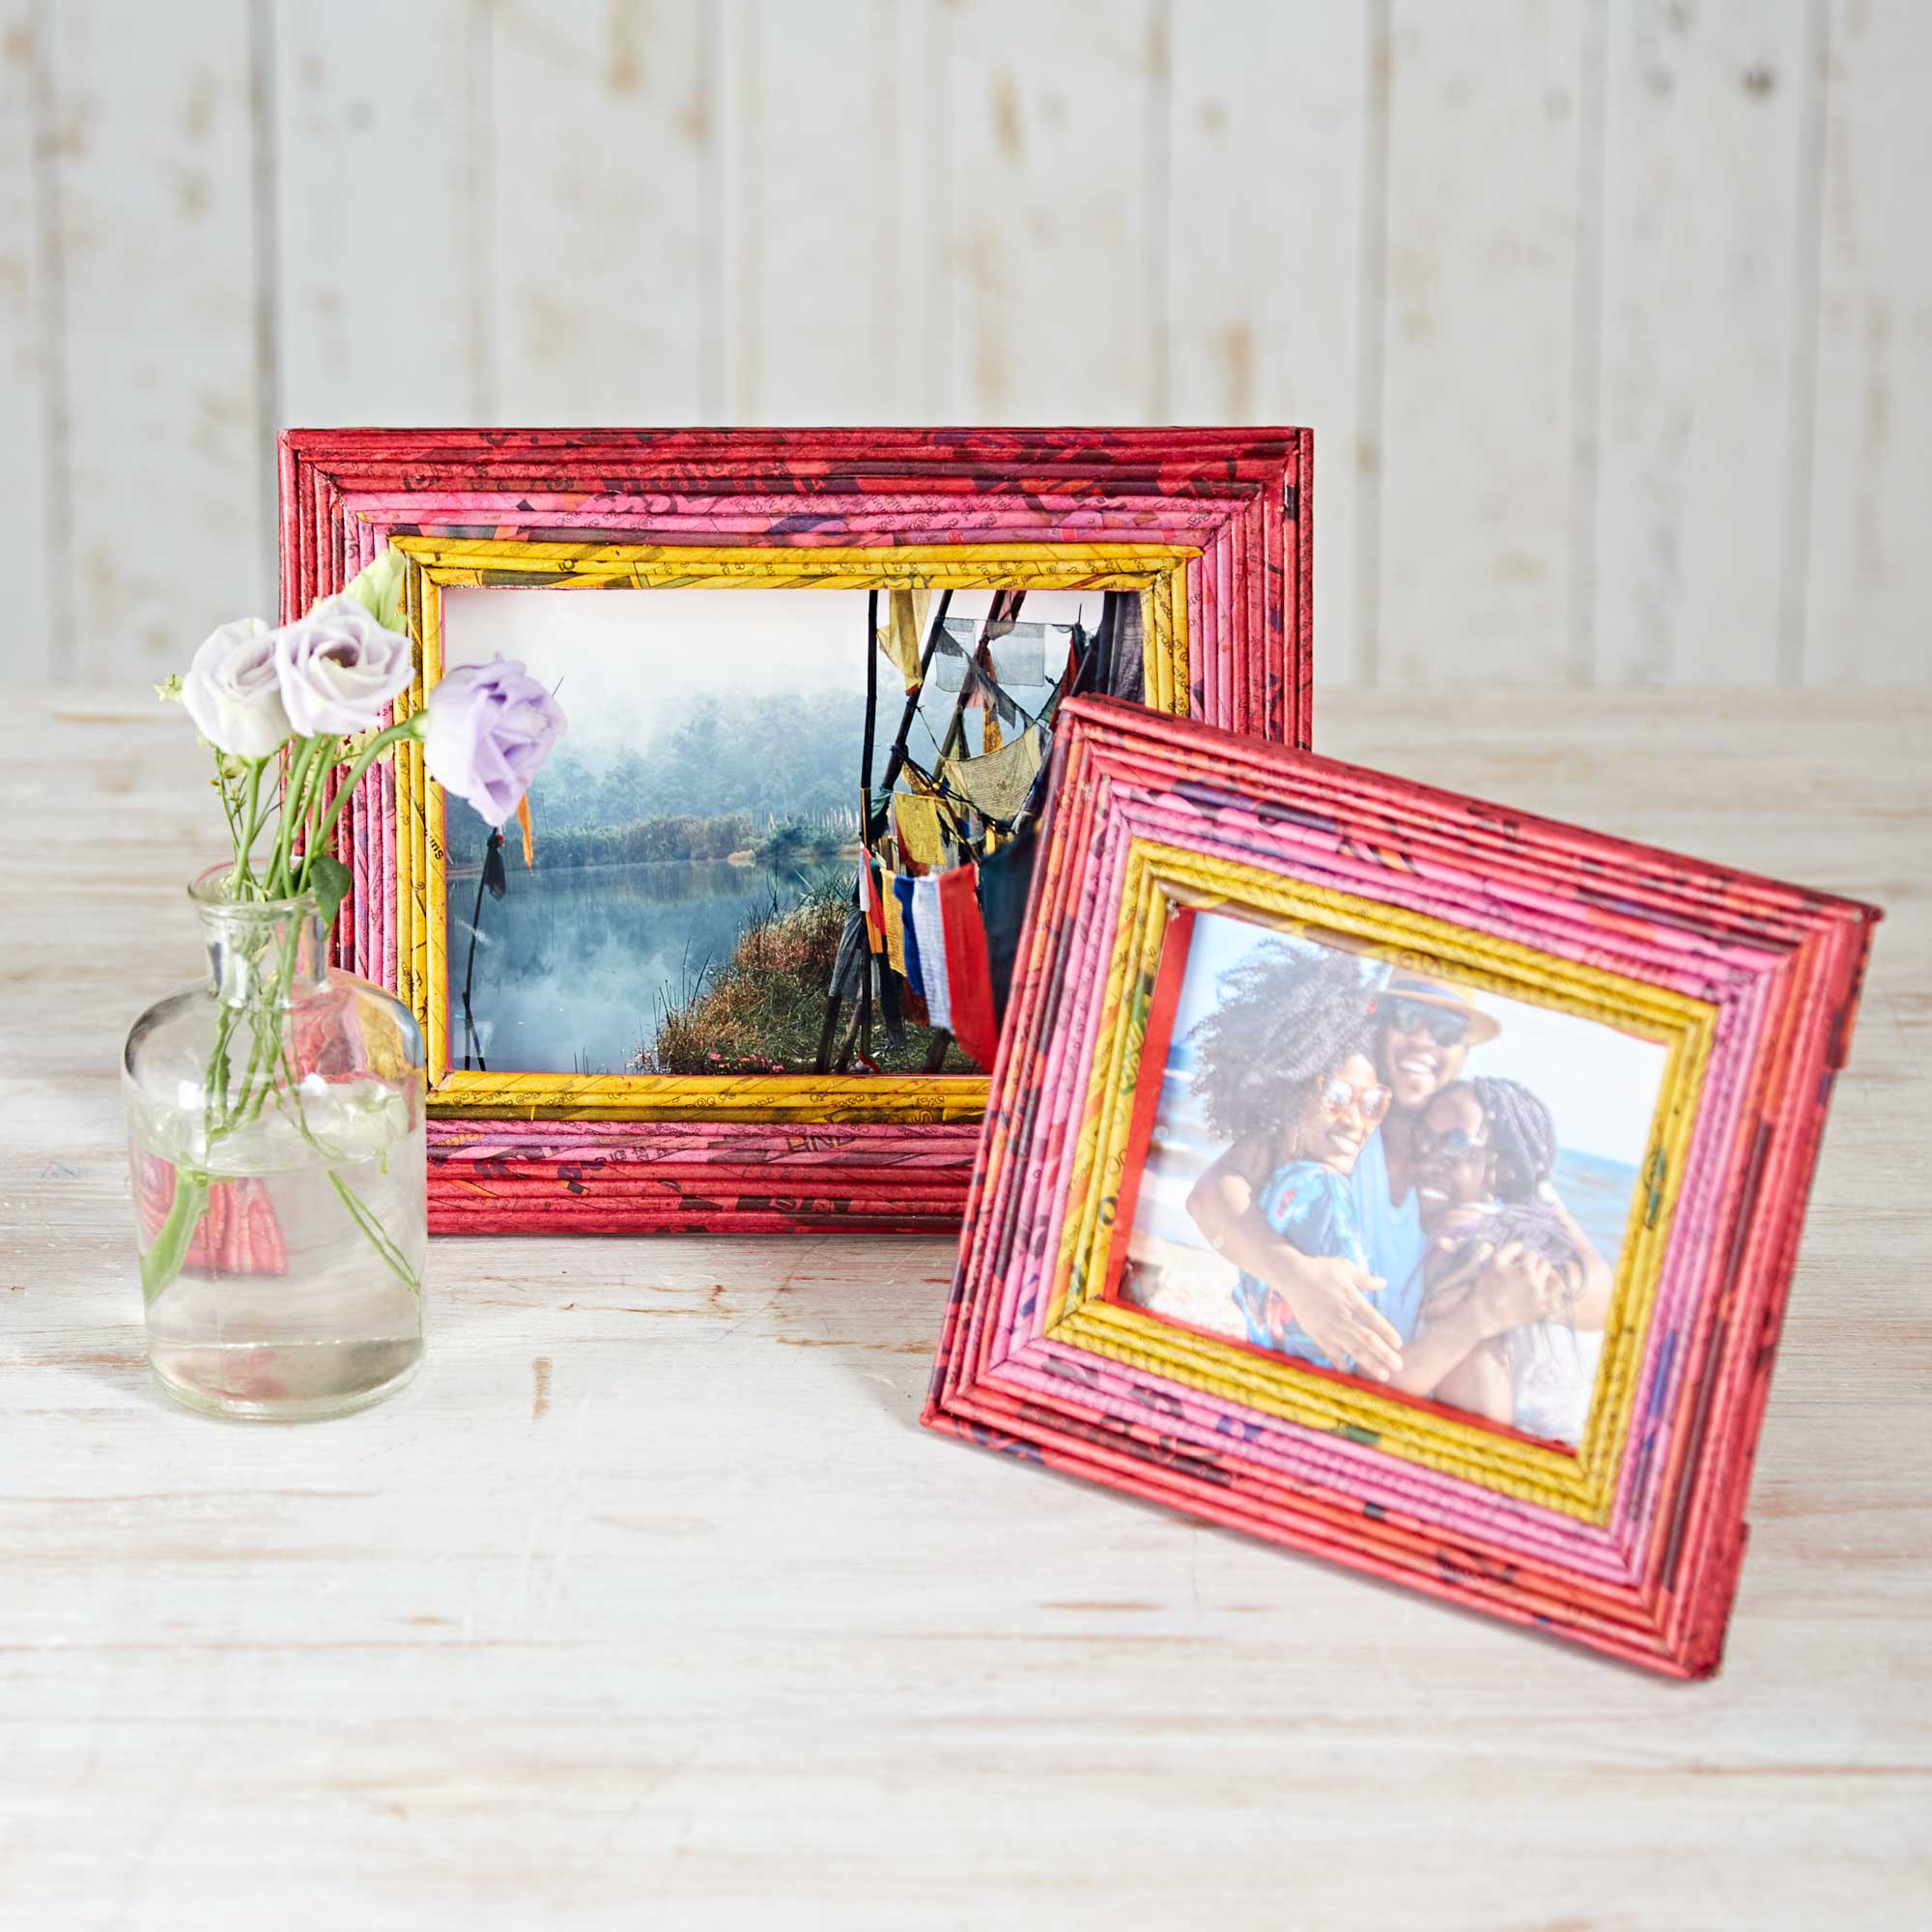 Recycled Newspaper Photo Frame - 4 x 6 Picture Frame